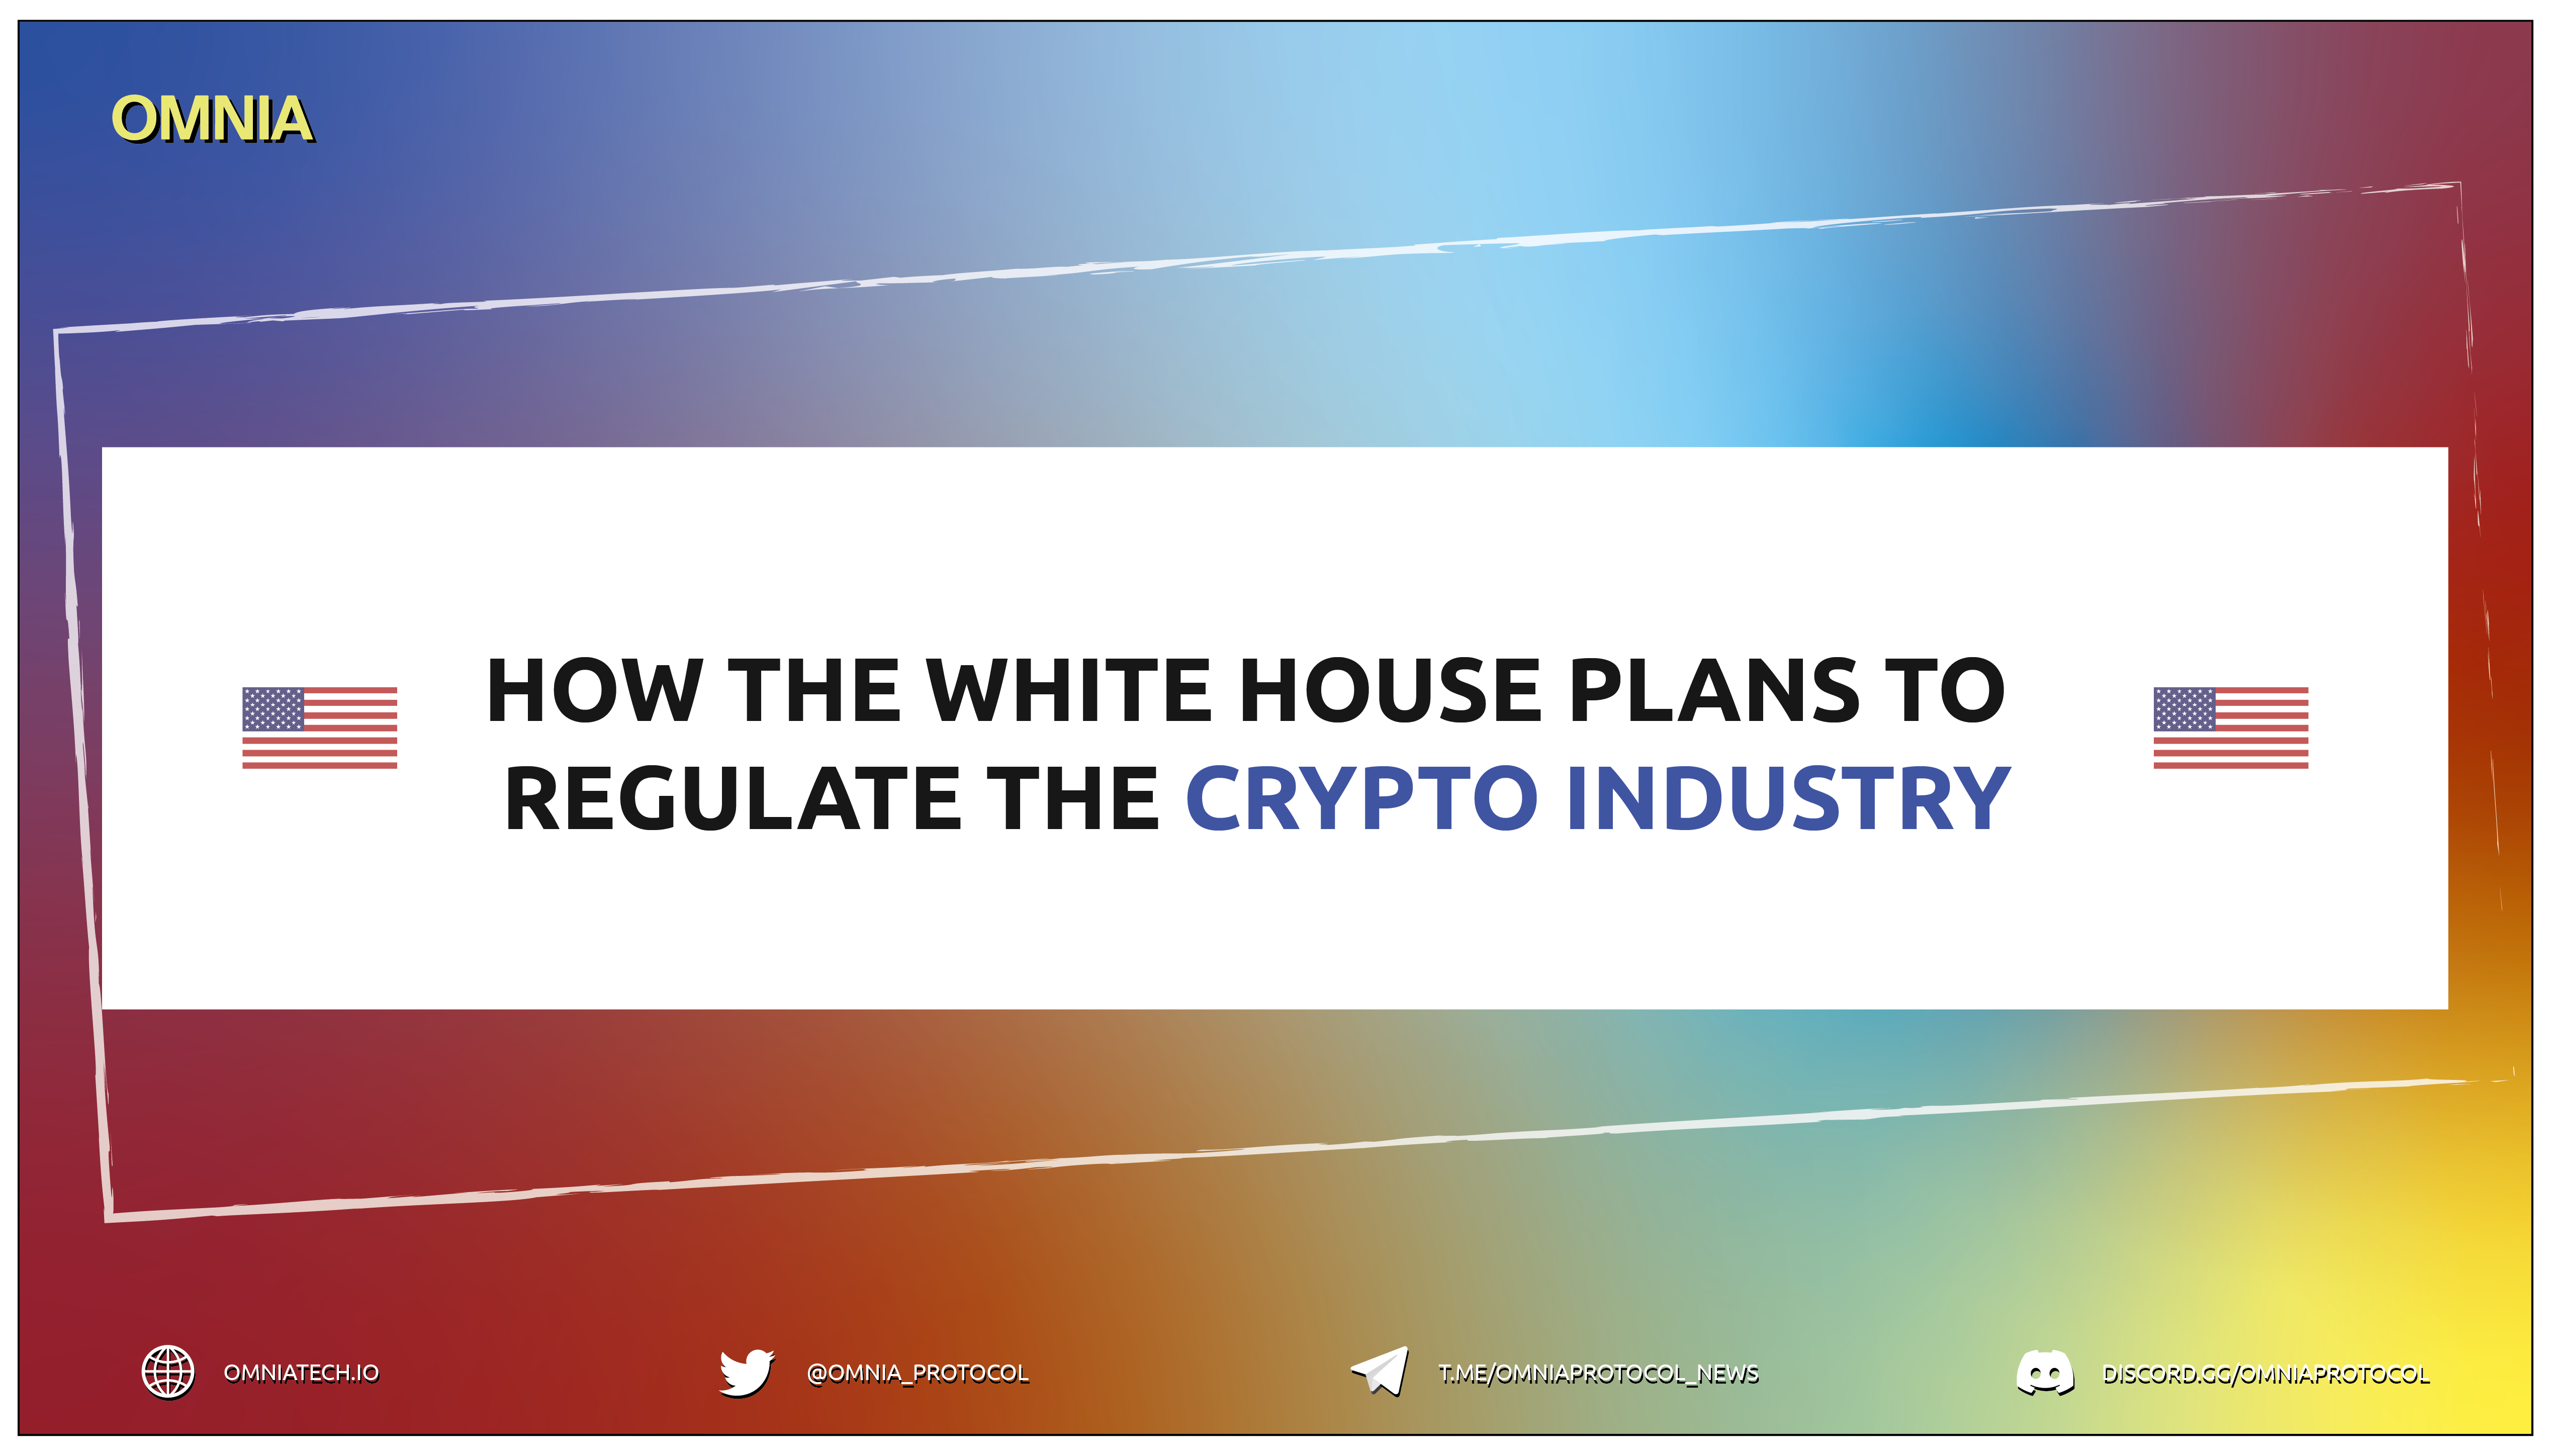 How the White House Plans to Regulate the Crypto Industry